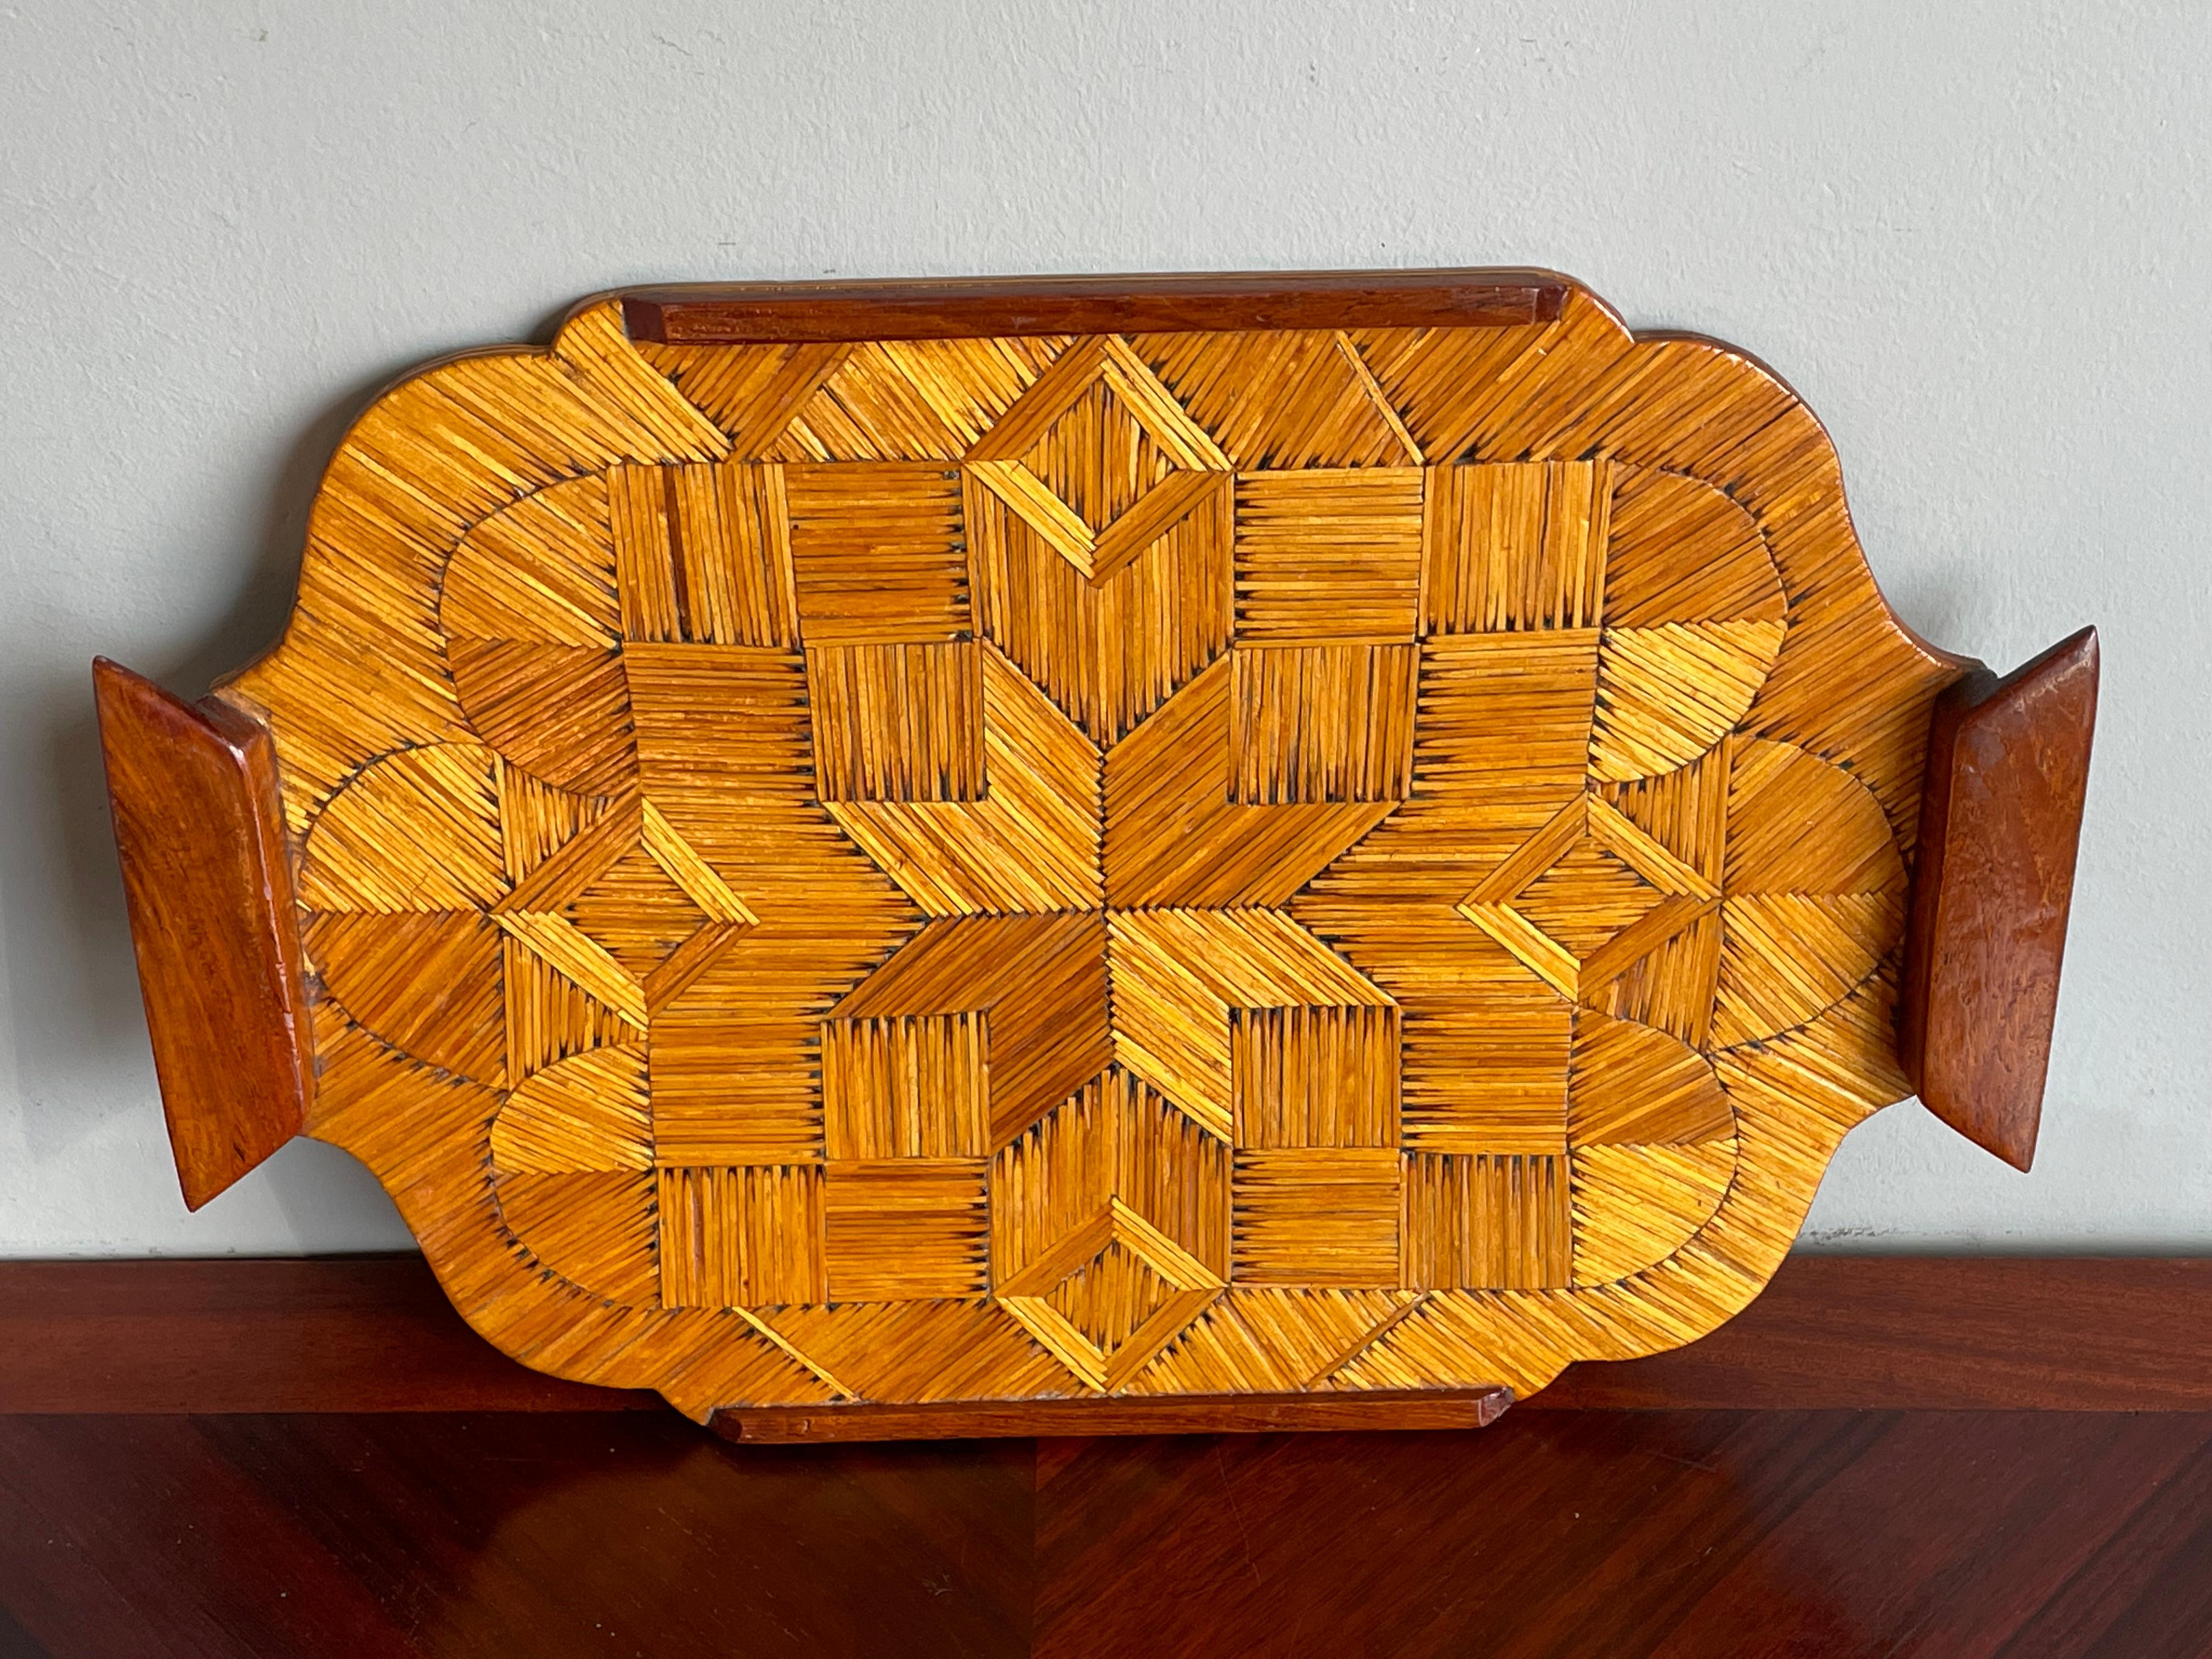 Midcentury Folk Art Serving Tray, Handmade of Burnt Matches in Parquetry Pattern In Excellent Condition For Sale In Lisse, NL